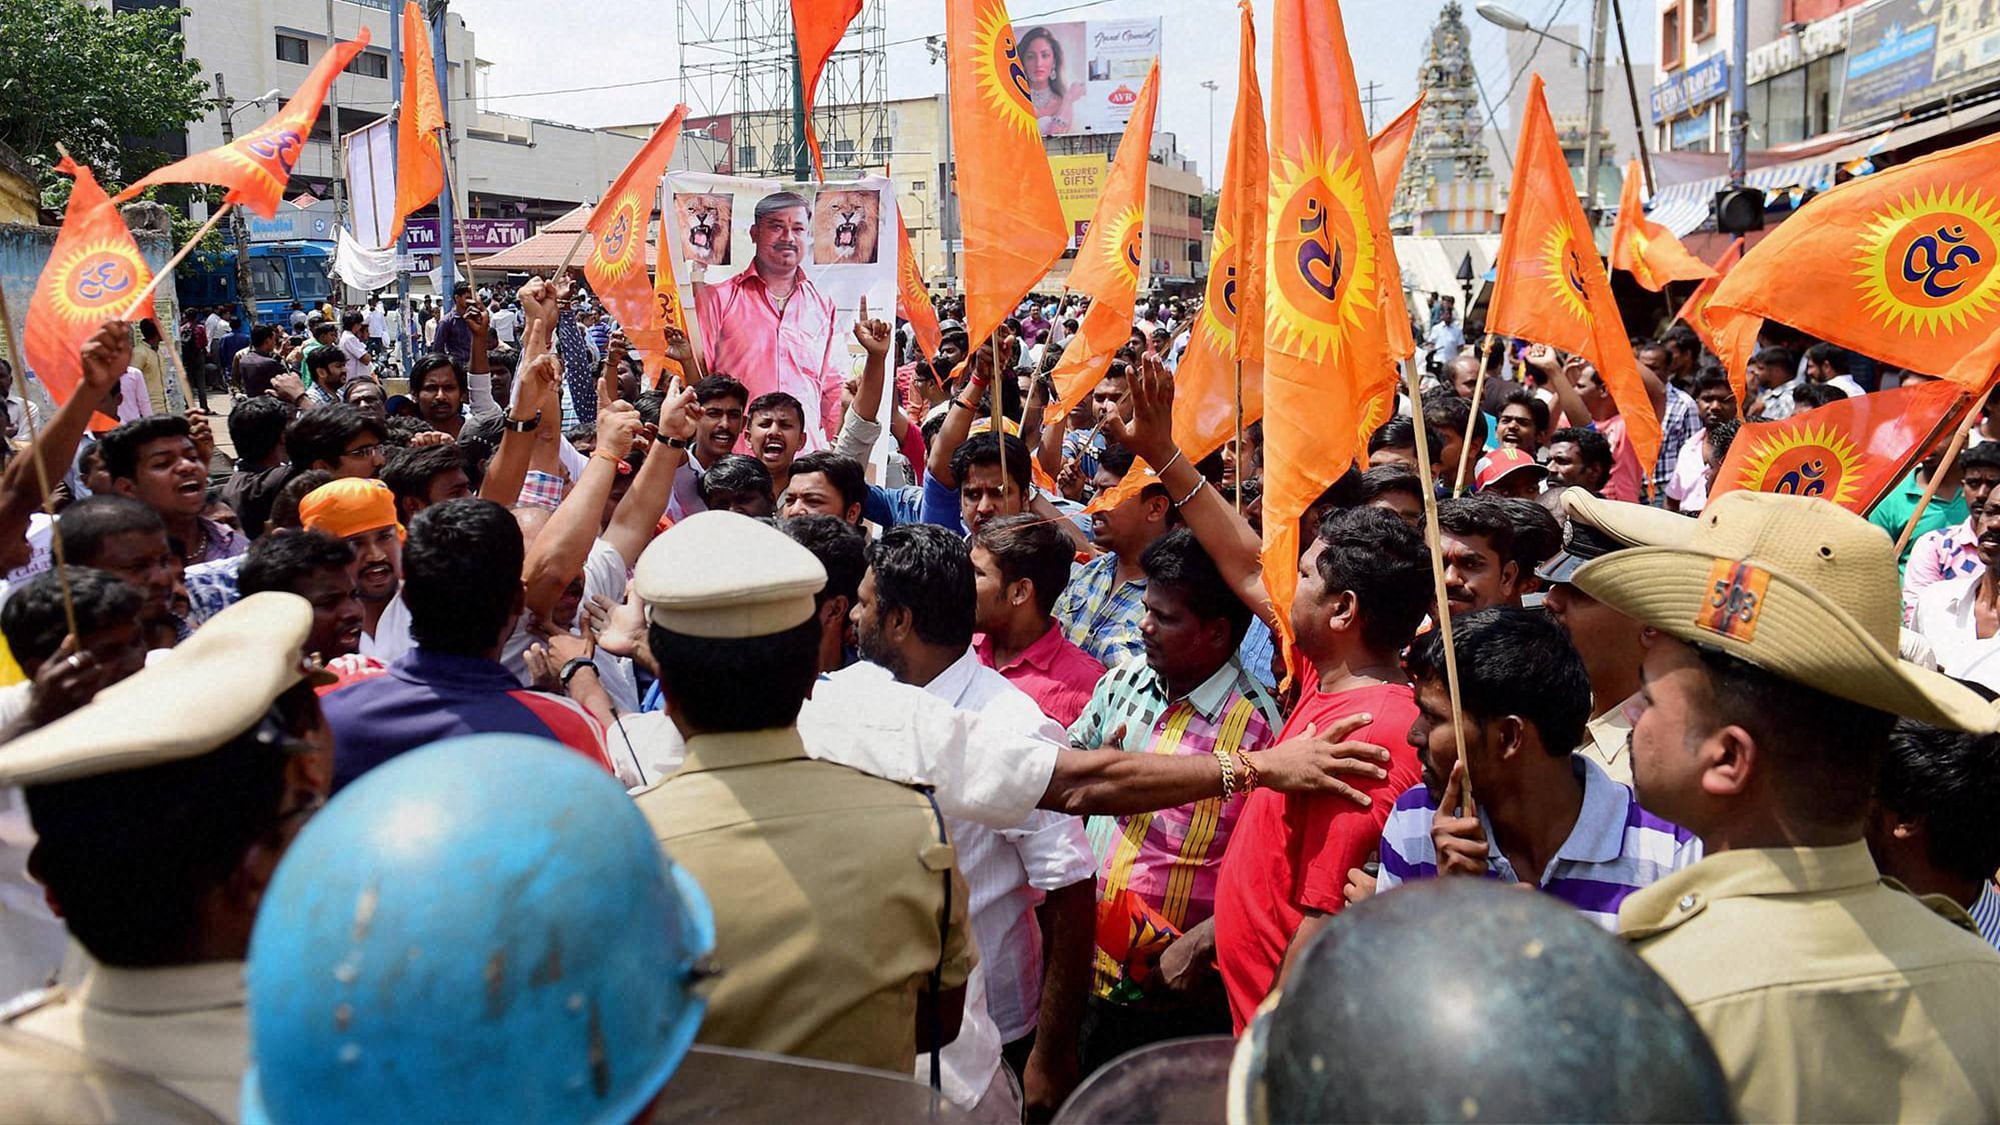 Image of a RSS rally used for representational purposes.